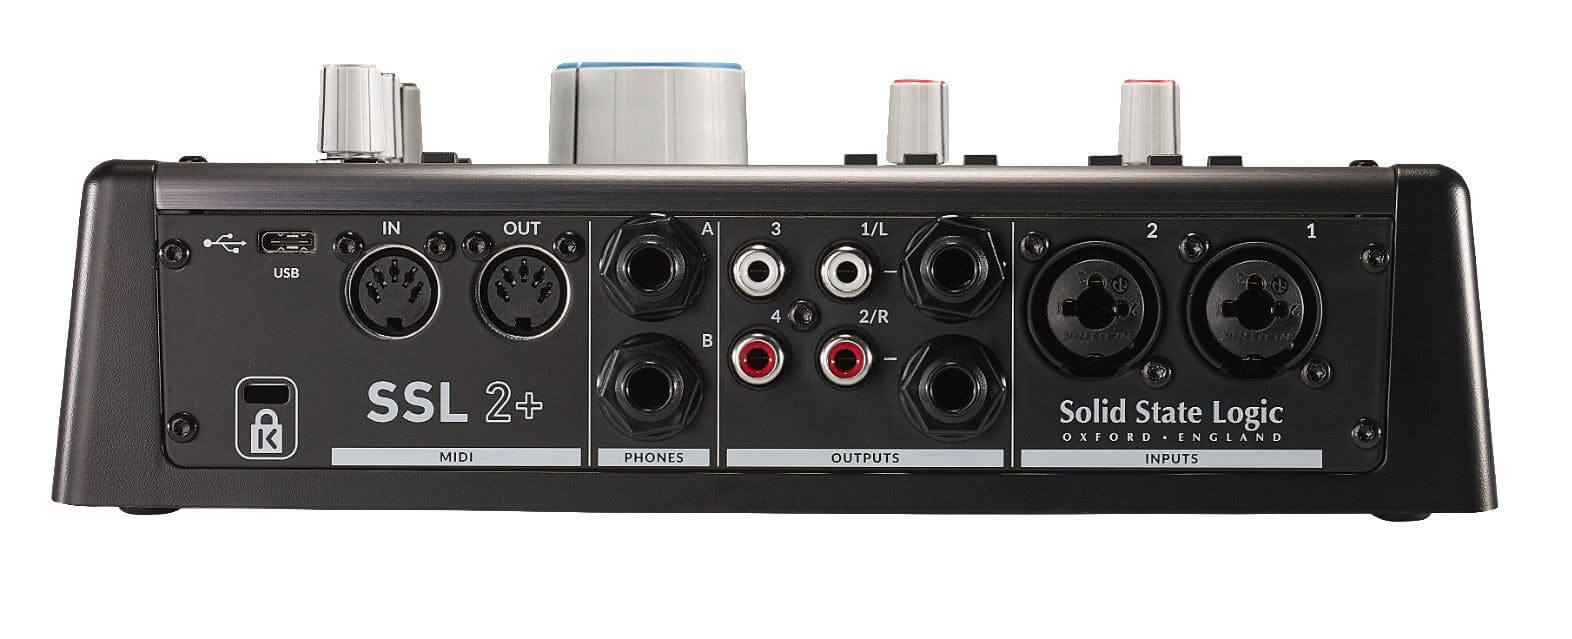 Two XLR/¼” inputs allow for microphones and instruments to connect to the SSL 2+. It features MIDI In/Out connectivity too, so it